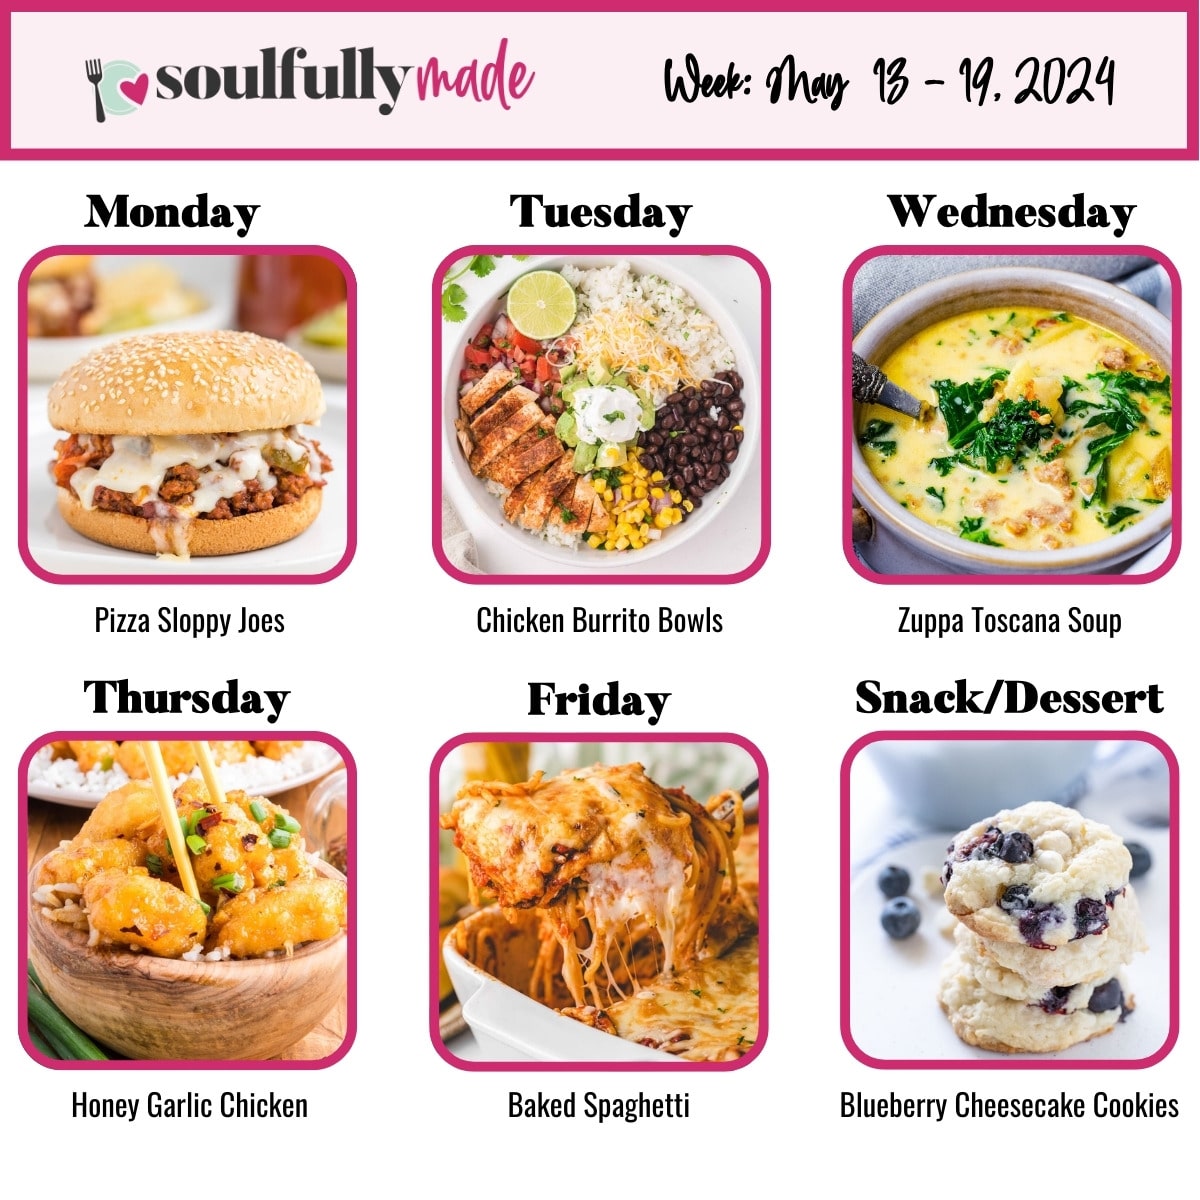 Weekly meal plan for May 13, 2024 pizza sloppy joes, chicken burrito bowls, zuppa toscana, chinese honey garlic chicken, baked spaghetti, and blueberry cheesecake cookies.